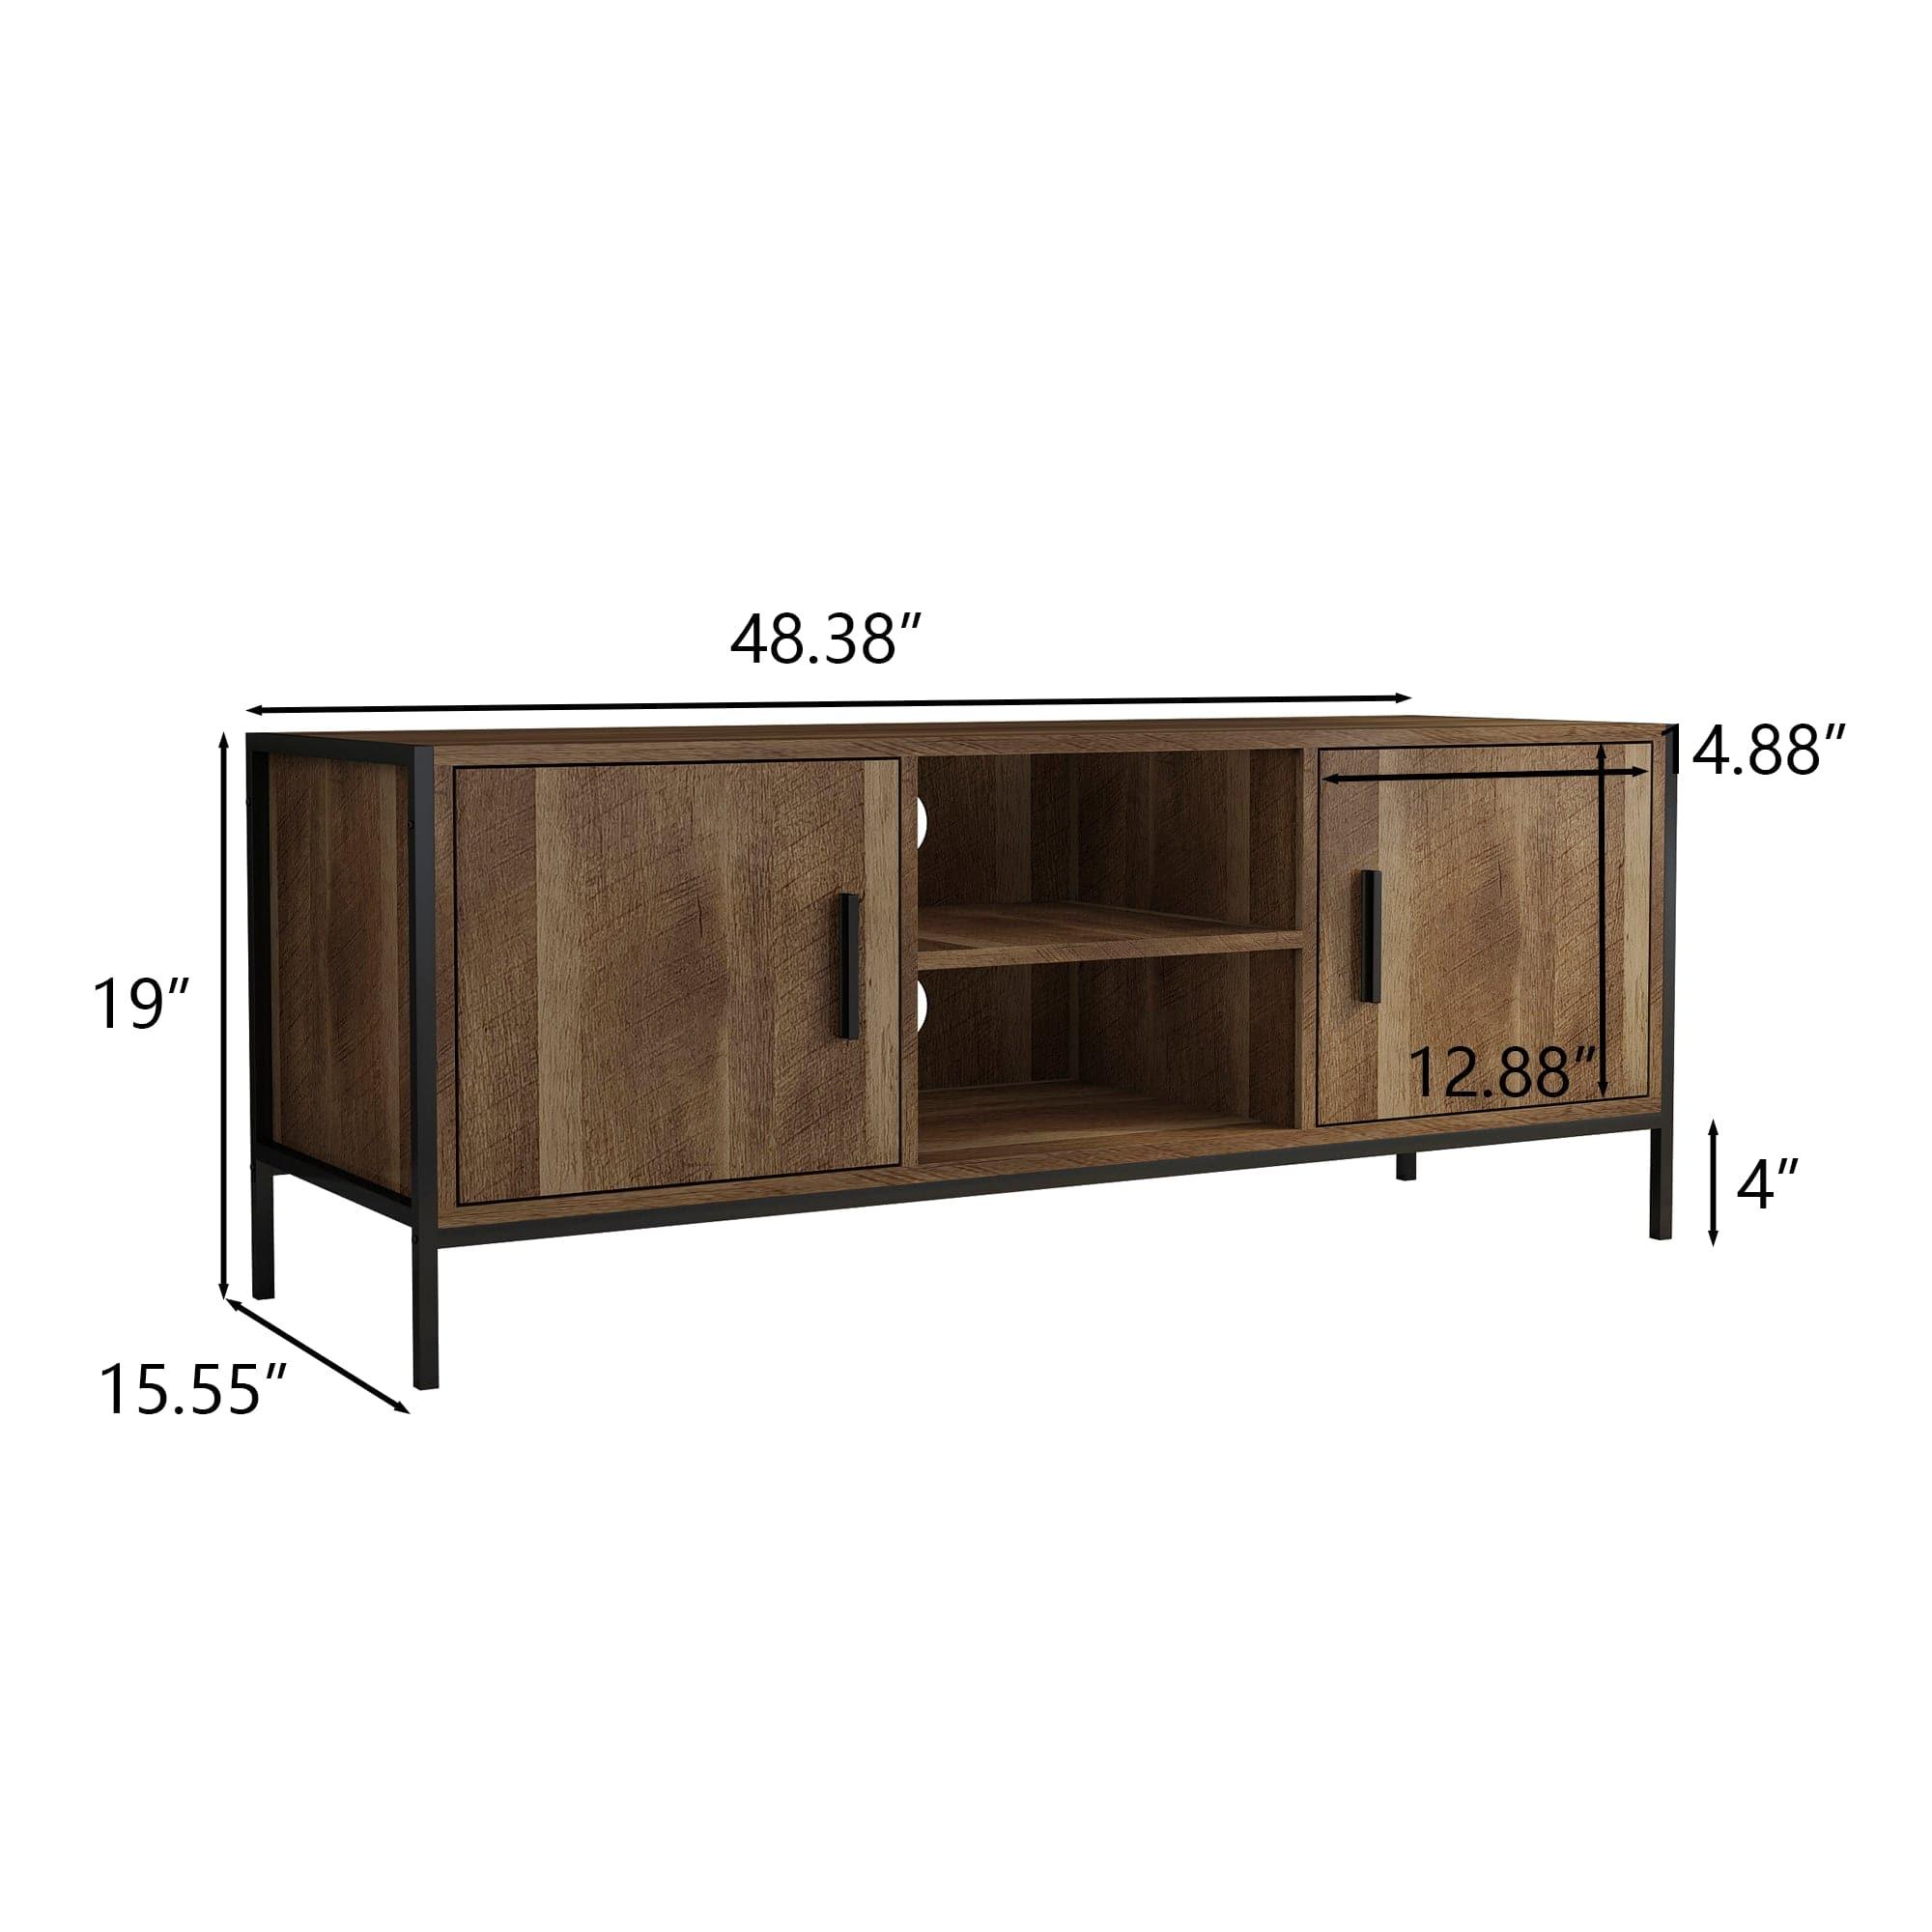 Shop Modern Design TV stand，Easy Assembly，Minimalist Style Entertainment Center with 2 Storage Cabinets and Open Shelves, TV Console Table Media Cabinet with Storage, for Living Room Bedroom Mademoiselle Home Decor